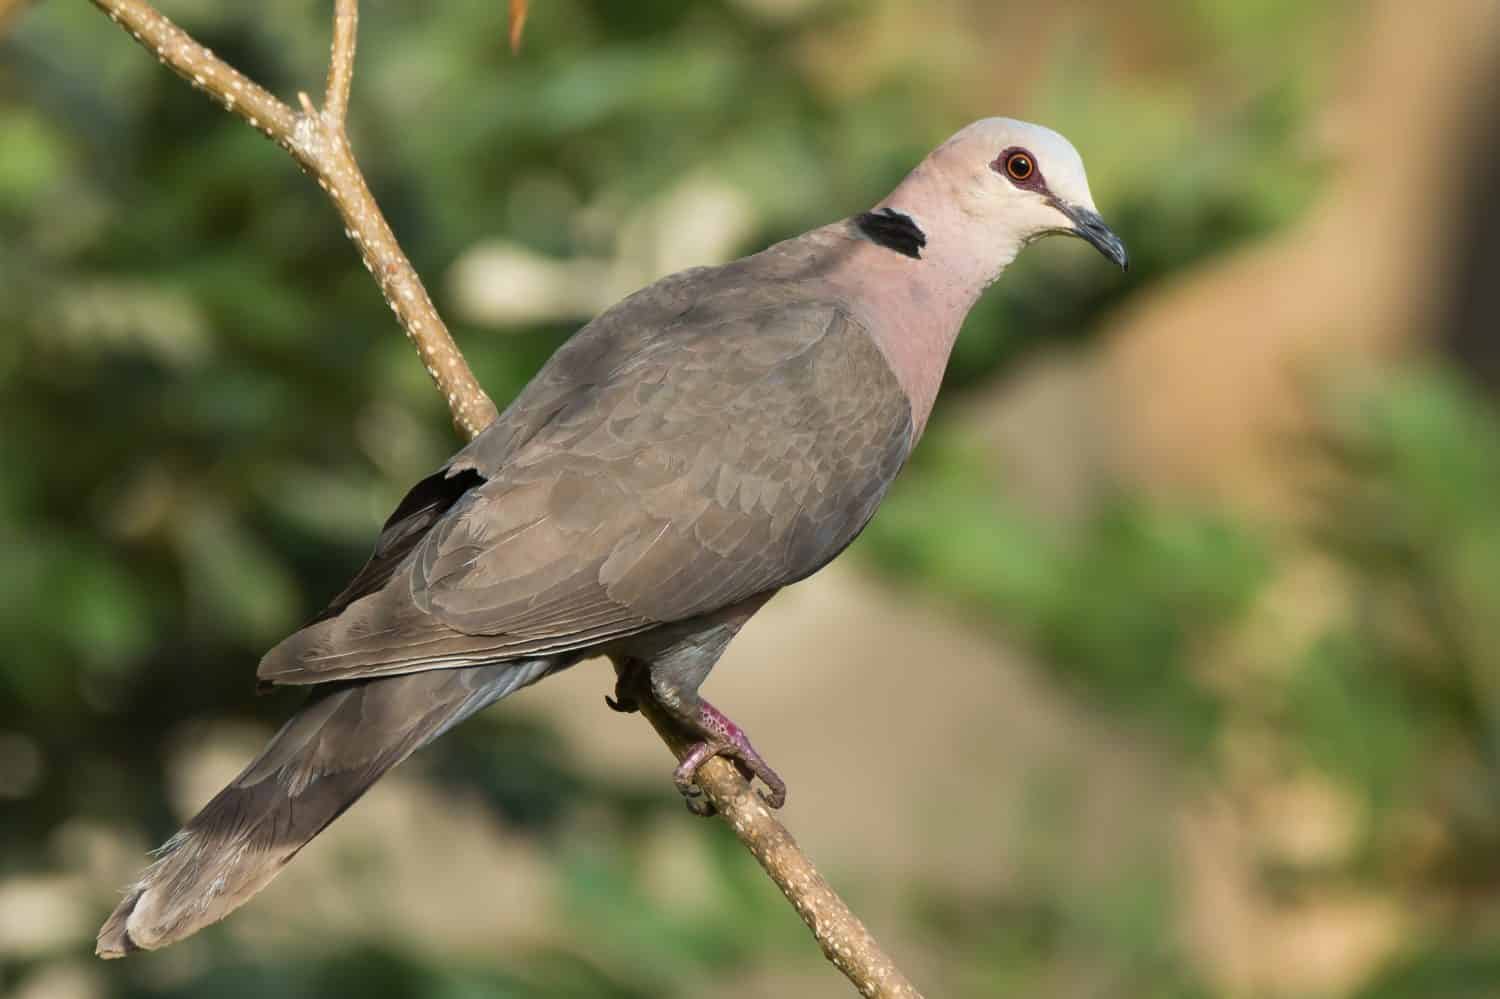 A Red-eyed Dove (Streptopelia semitorquata) perched on a branch